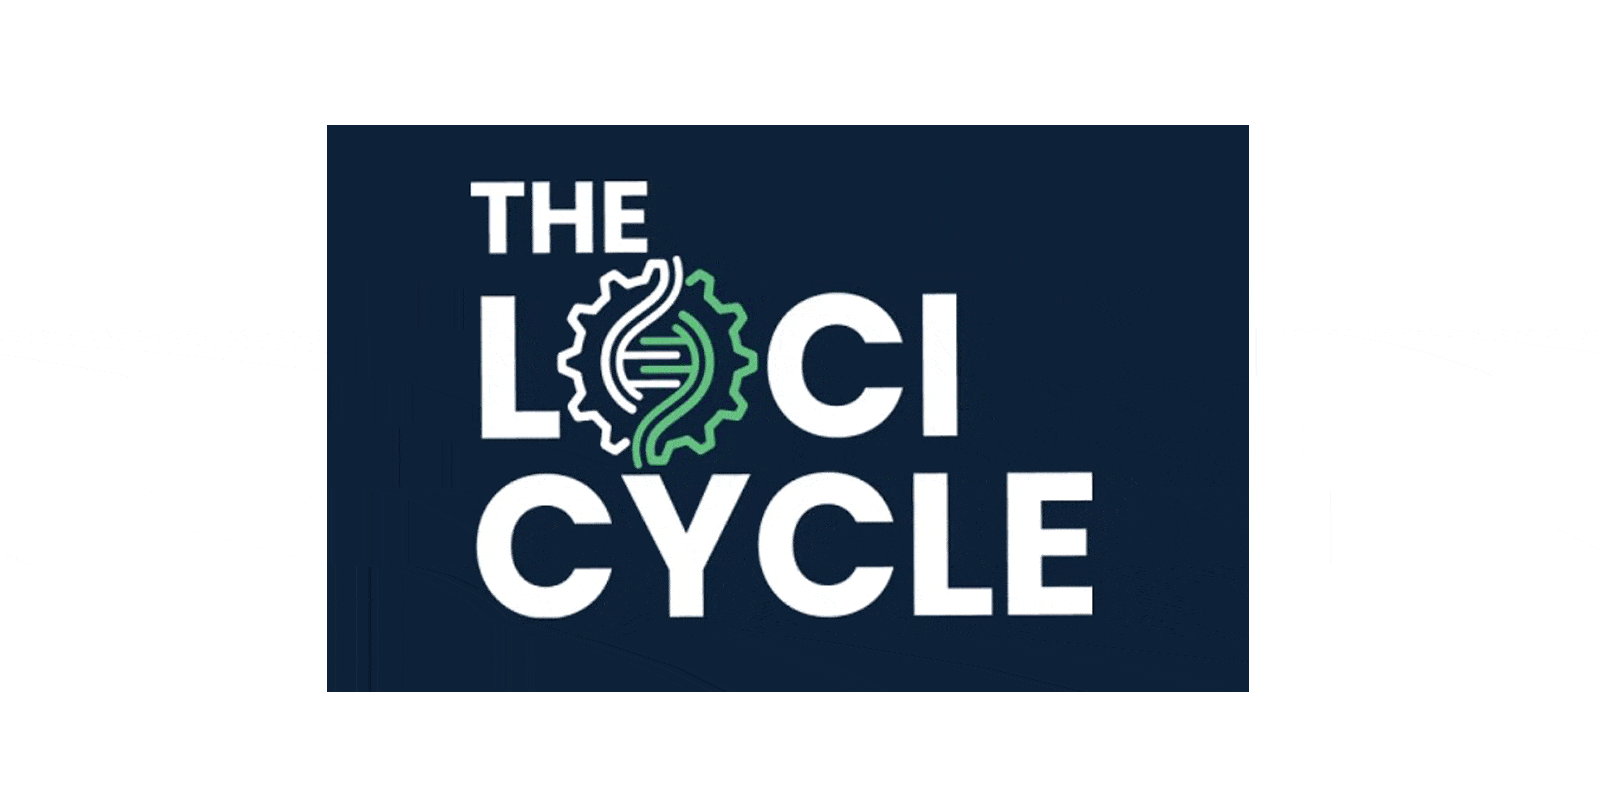 The-Loci-Cycle-Reviews